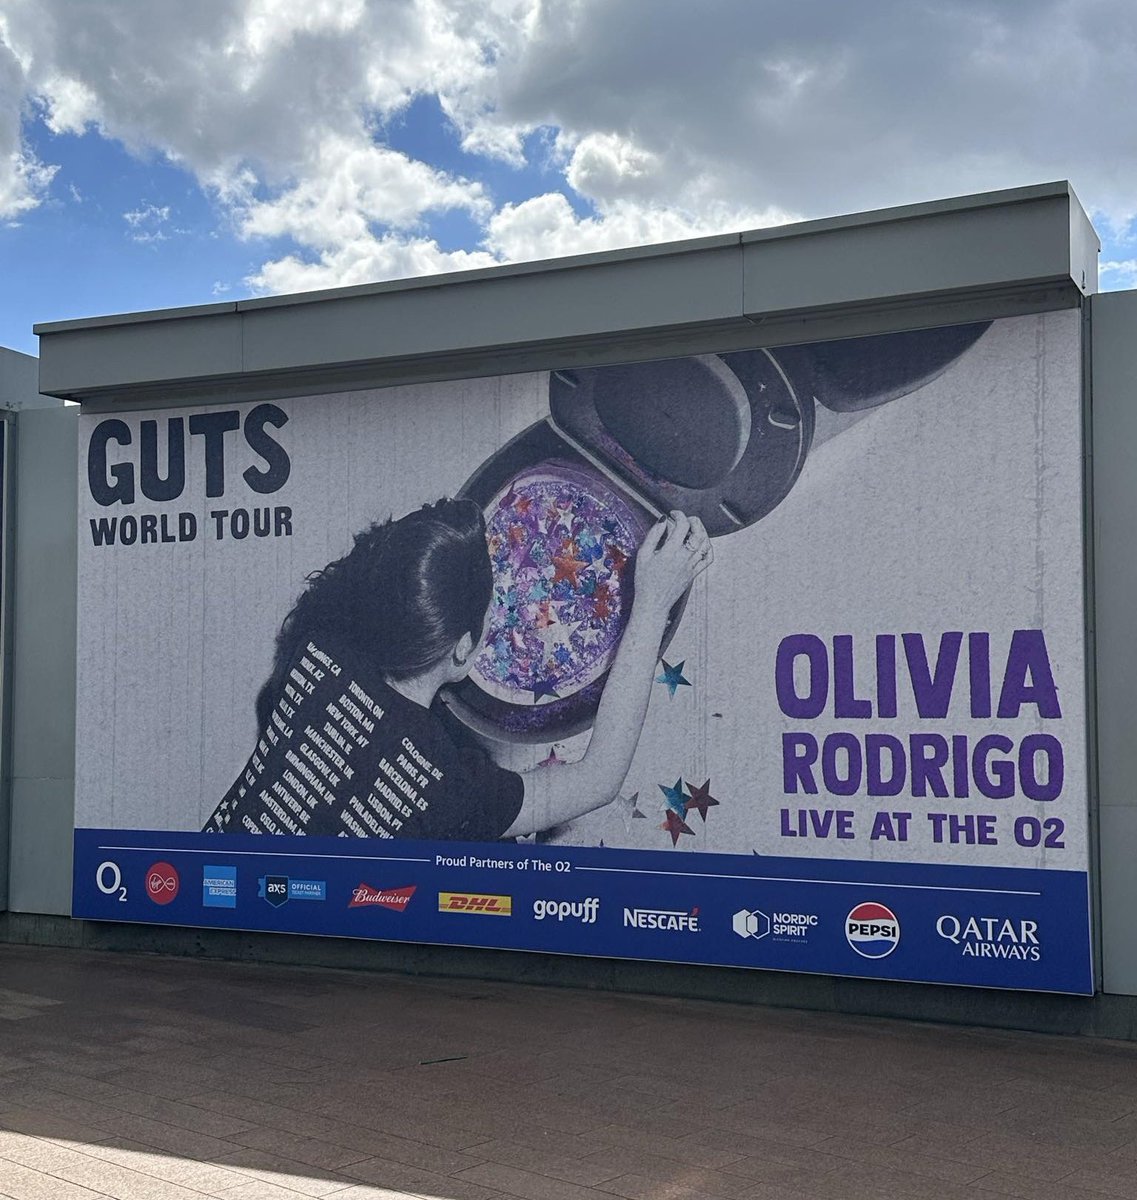 Great to see @TheO2 all decked out ready for @oliviarodrigo 💜 #GUTSWorldTour #OliviaRodrigo #OliviaRodrigoLondon